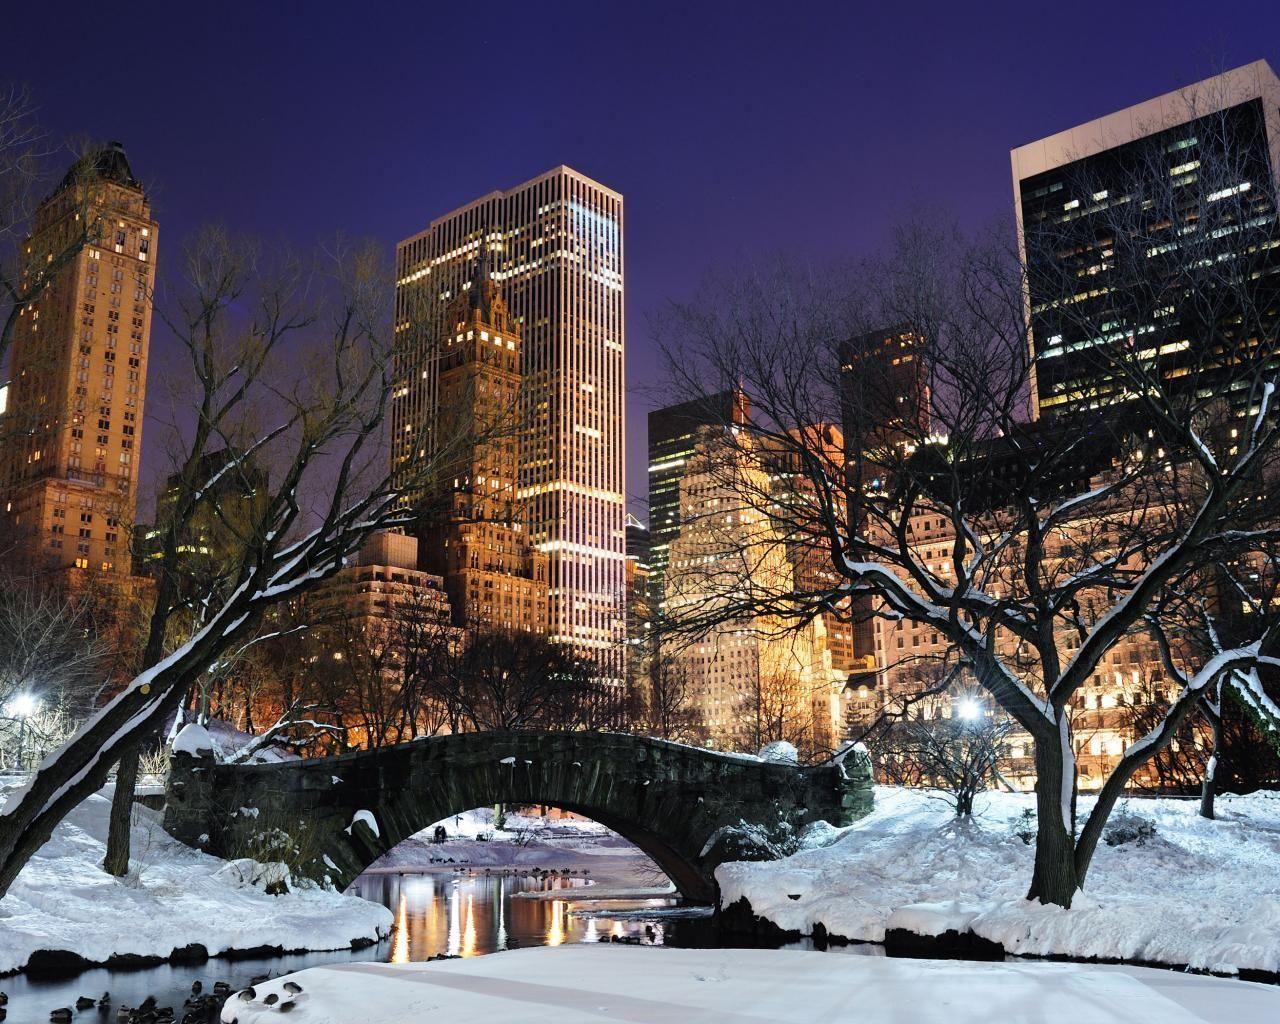 Central Park In The Snow At Night Wallpapers - Wallpaper Cave